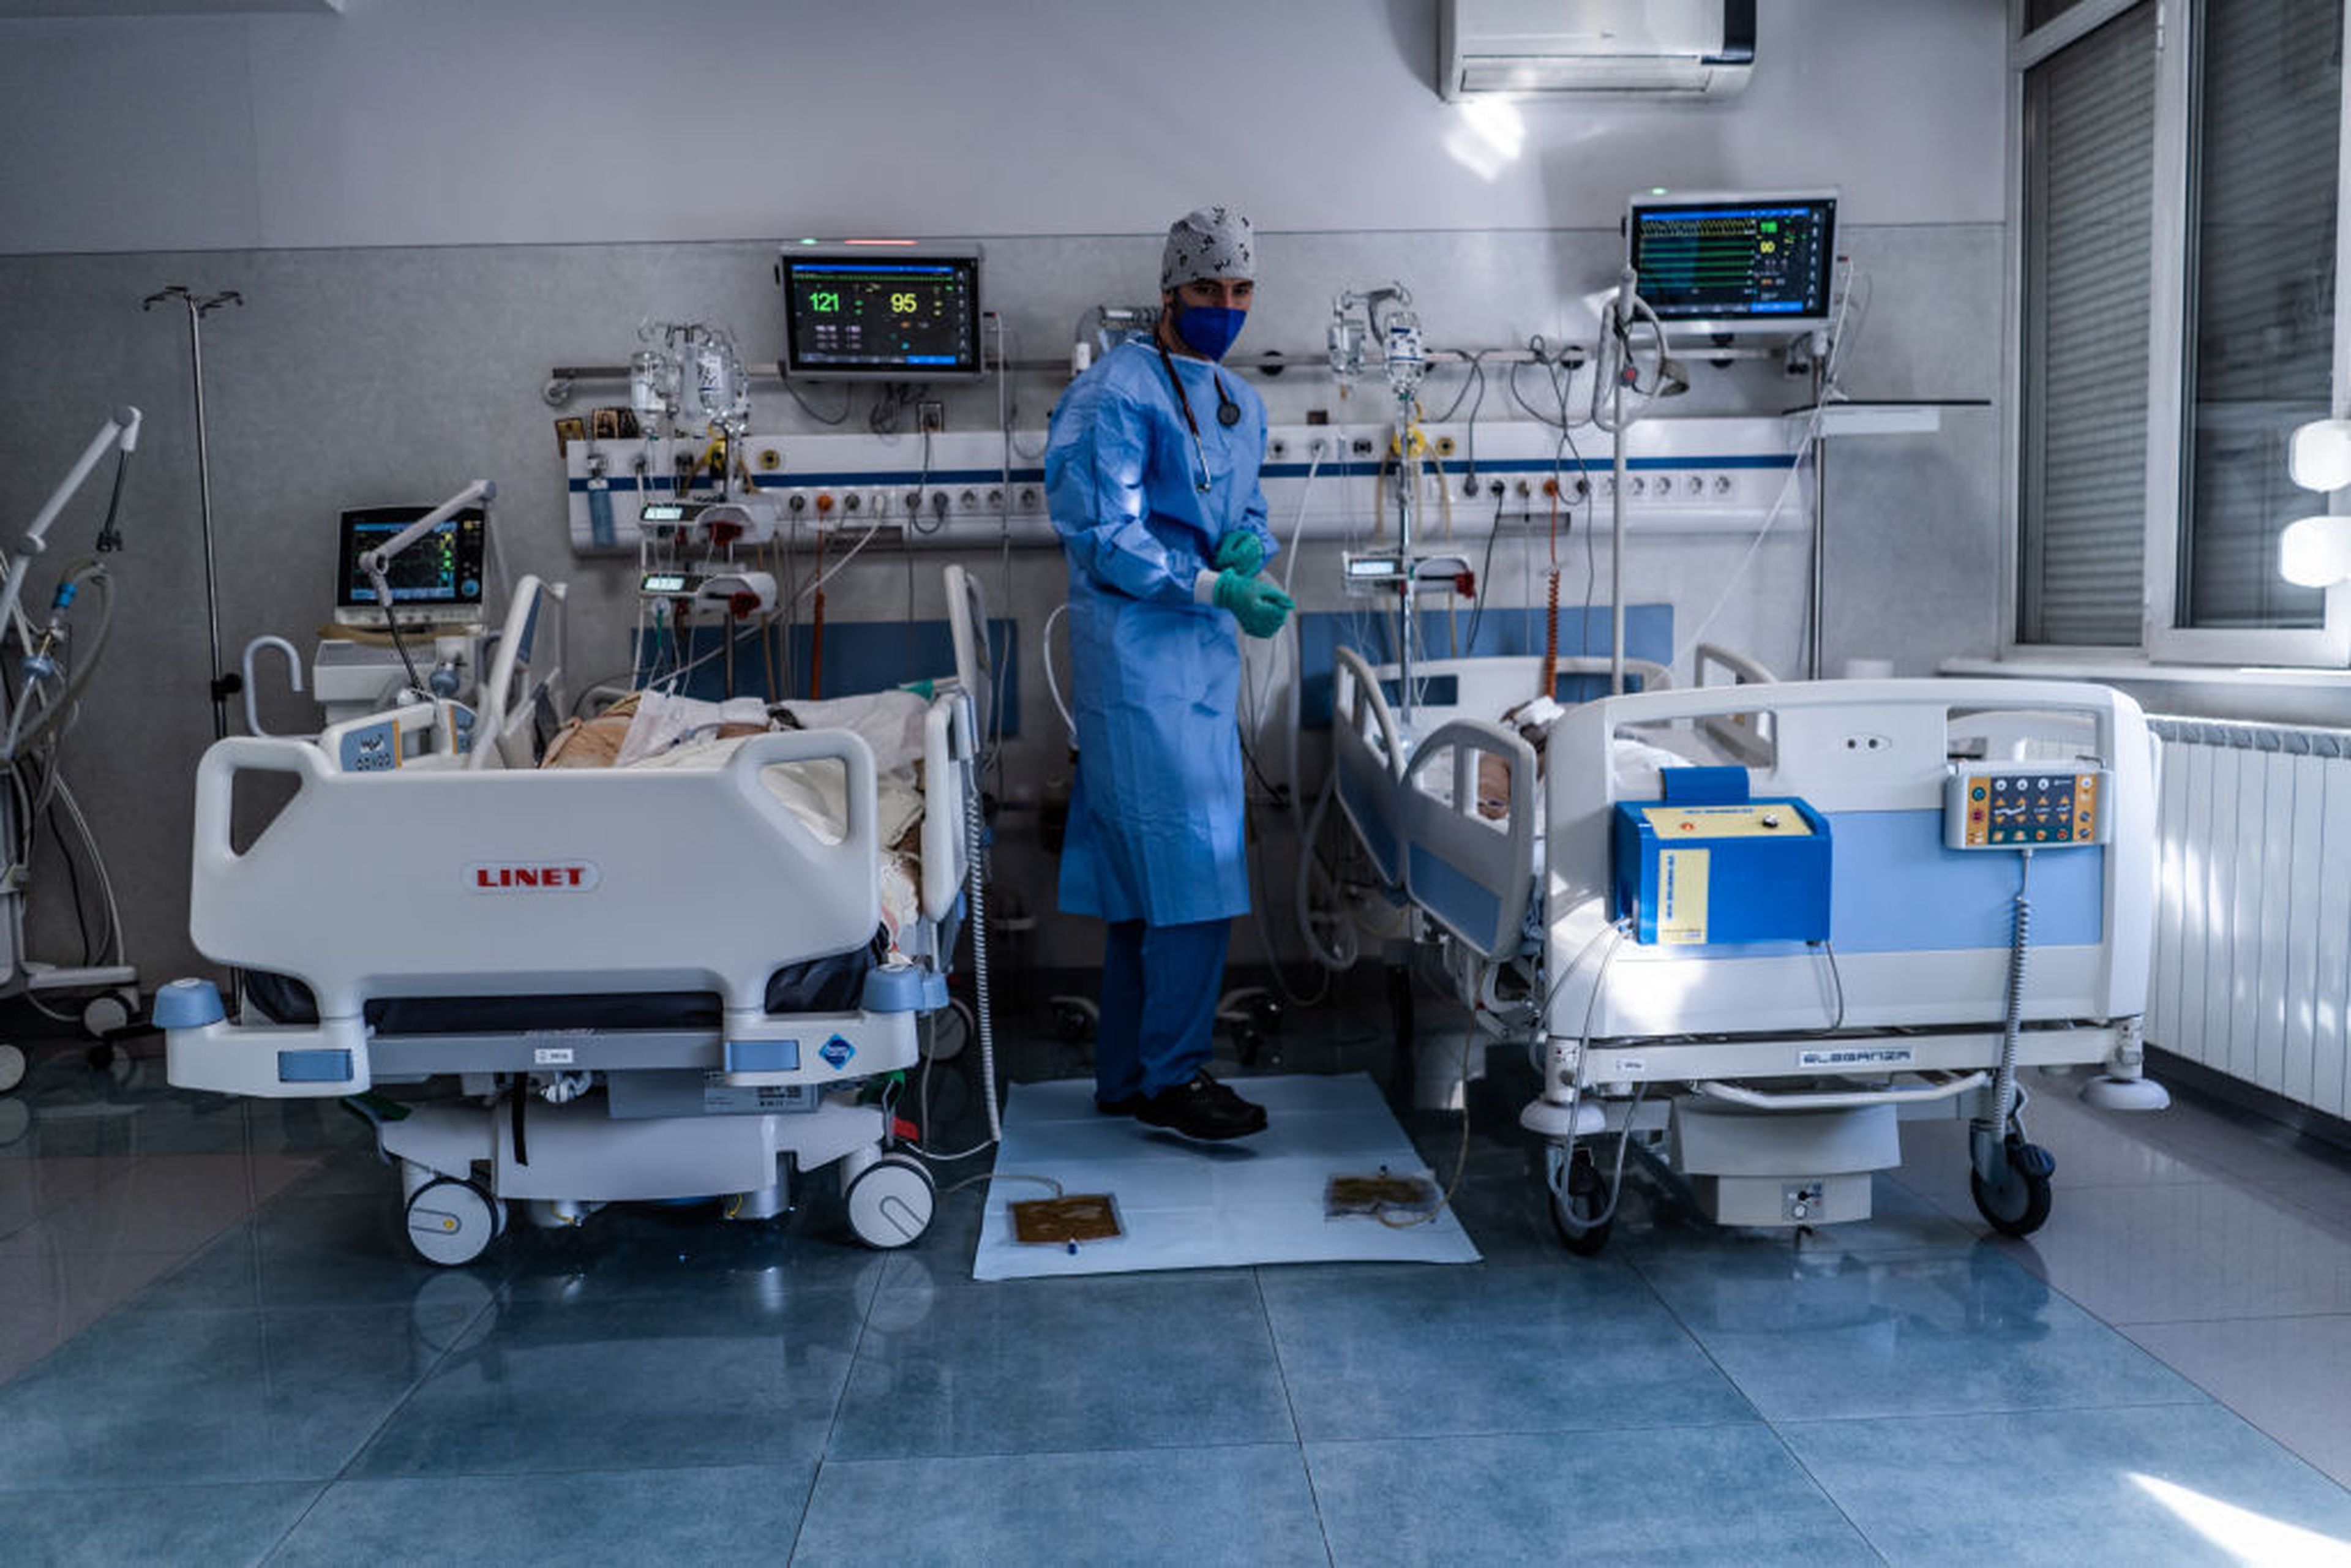 A large hospital can leverage thousands of connected medical devices, but locating and securing those vulnerable endpoints is an ongoing challenge for all providers. (Photo by Hristo Rusev/Getty Images)